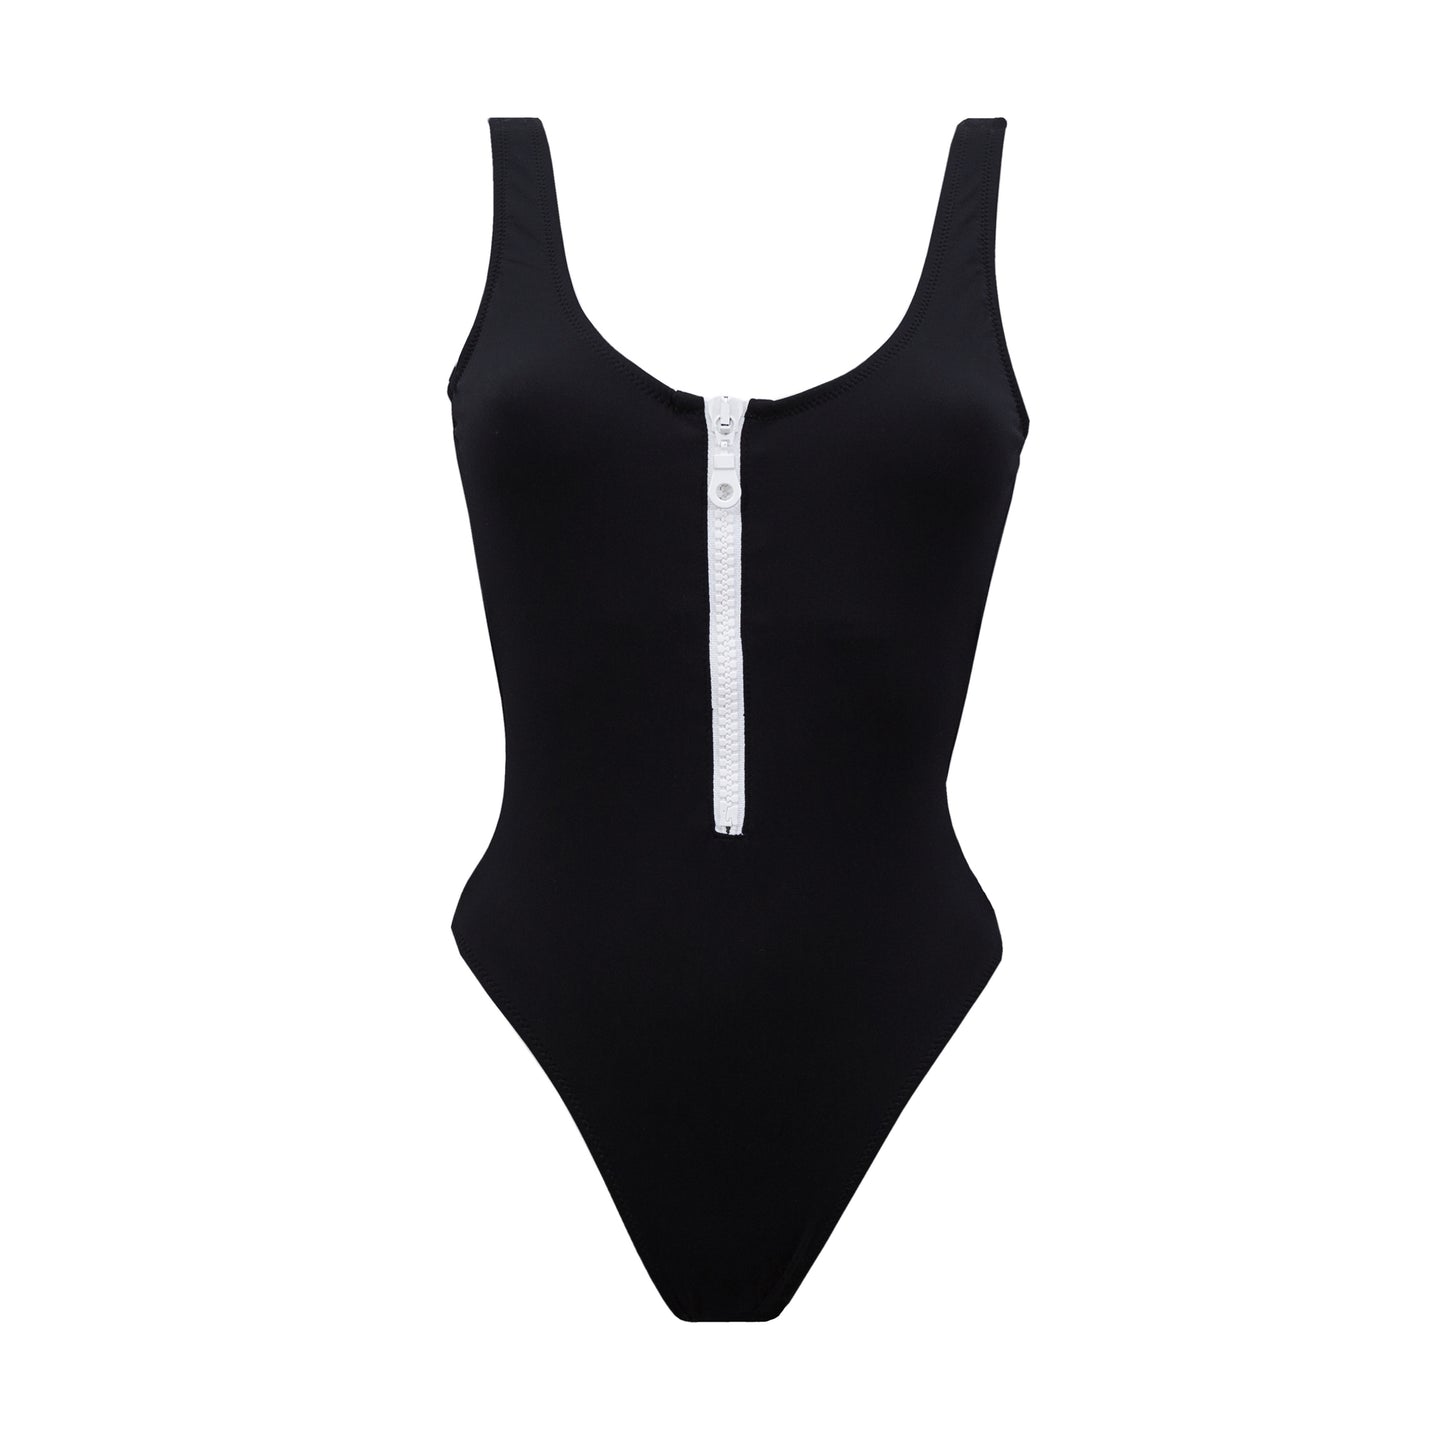 Black high and low cut one piece swimwear. White and adjustable big zipper. Open back and fitted at waist to flatter curves. Super stretchy and soft with double lining. Bañador negro. Bañador con cremallera.